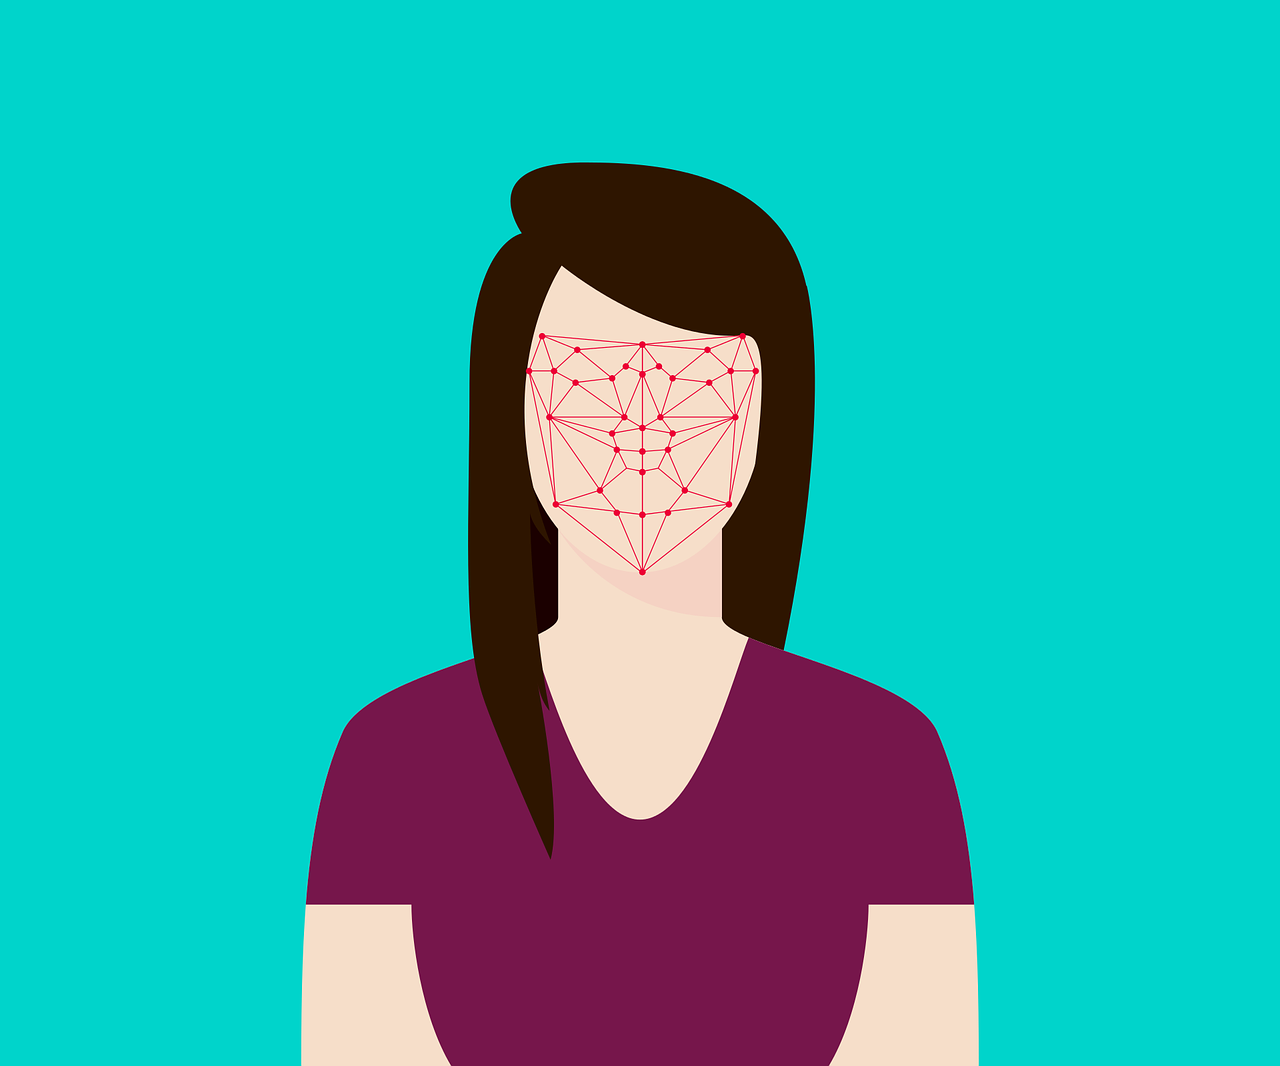 Illustration of a woman who’s face is obscured with red lines symbolizing facial recognition technology.